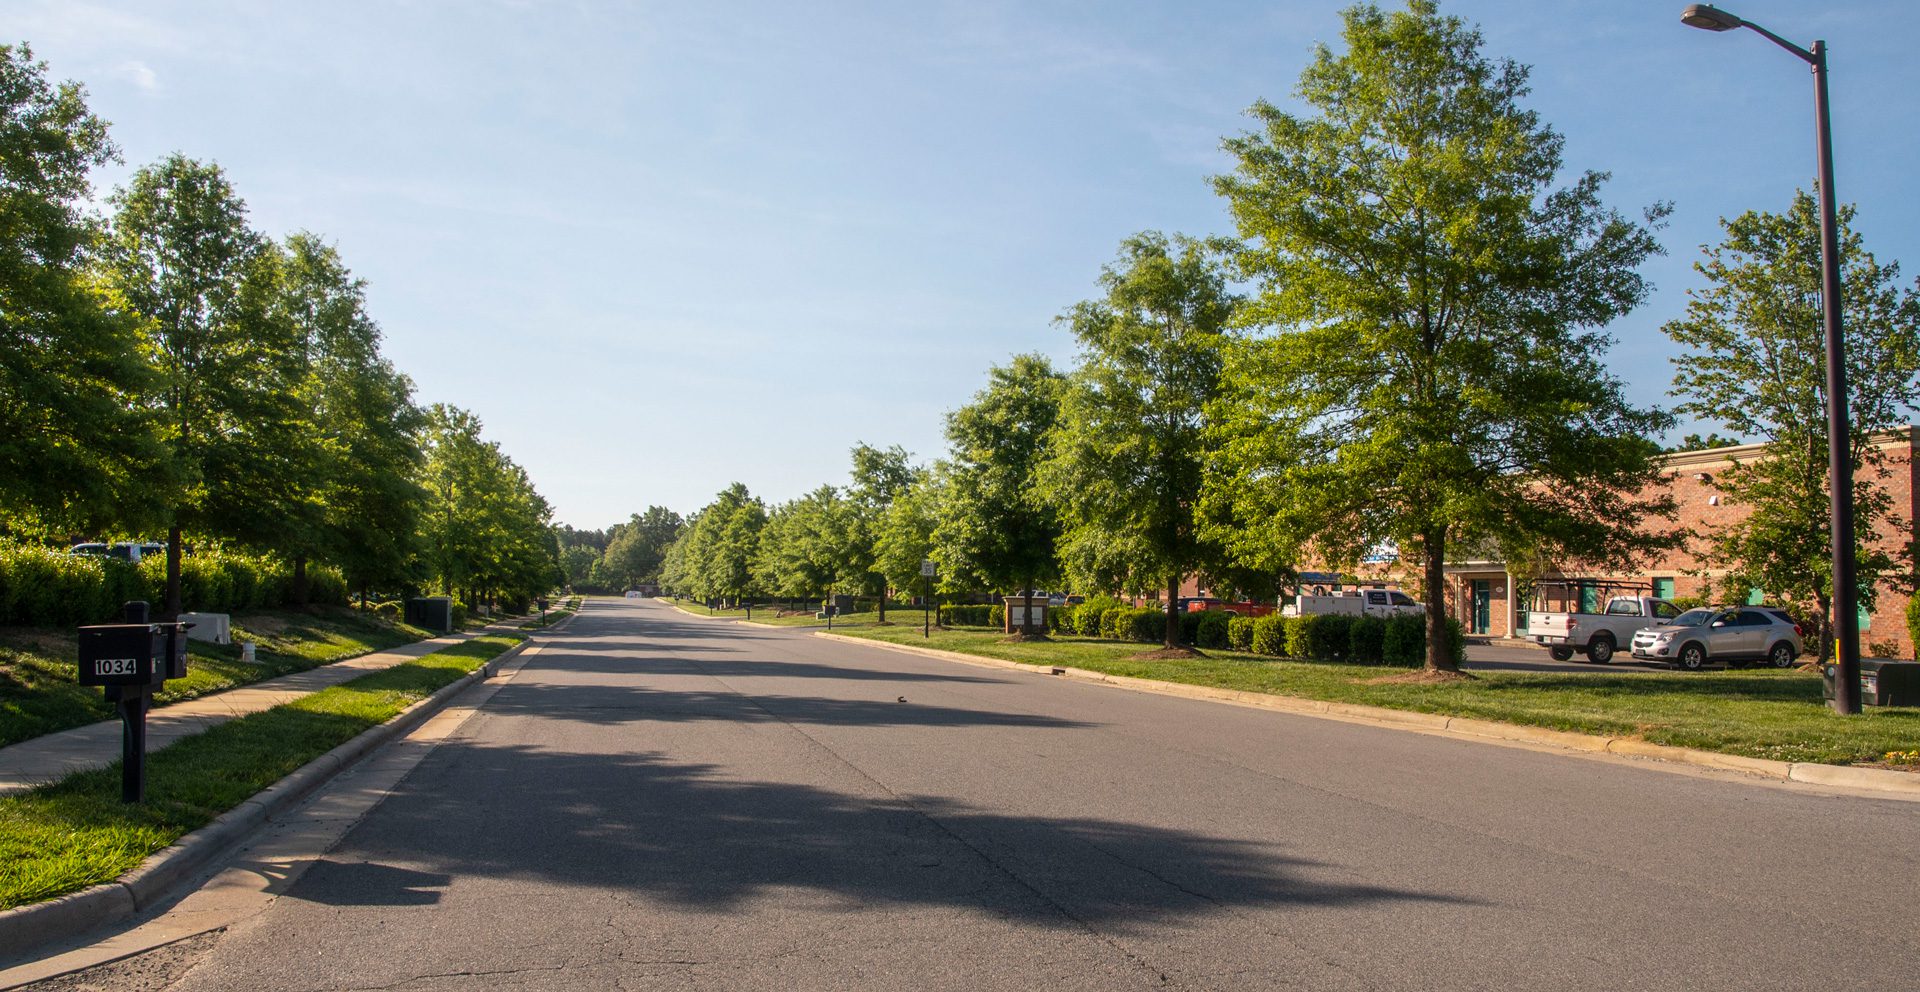 Old Hickory street lined with trees on a sunny day